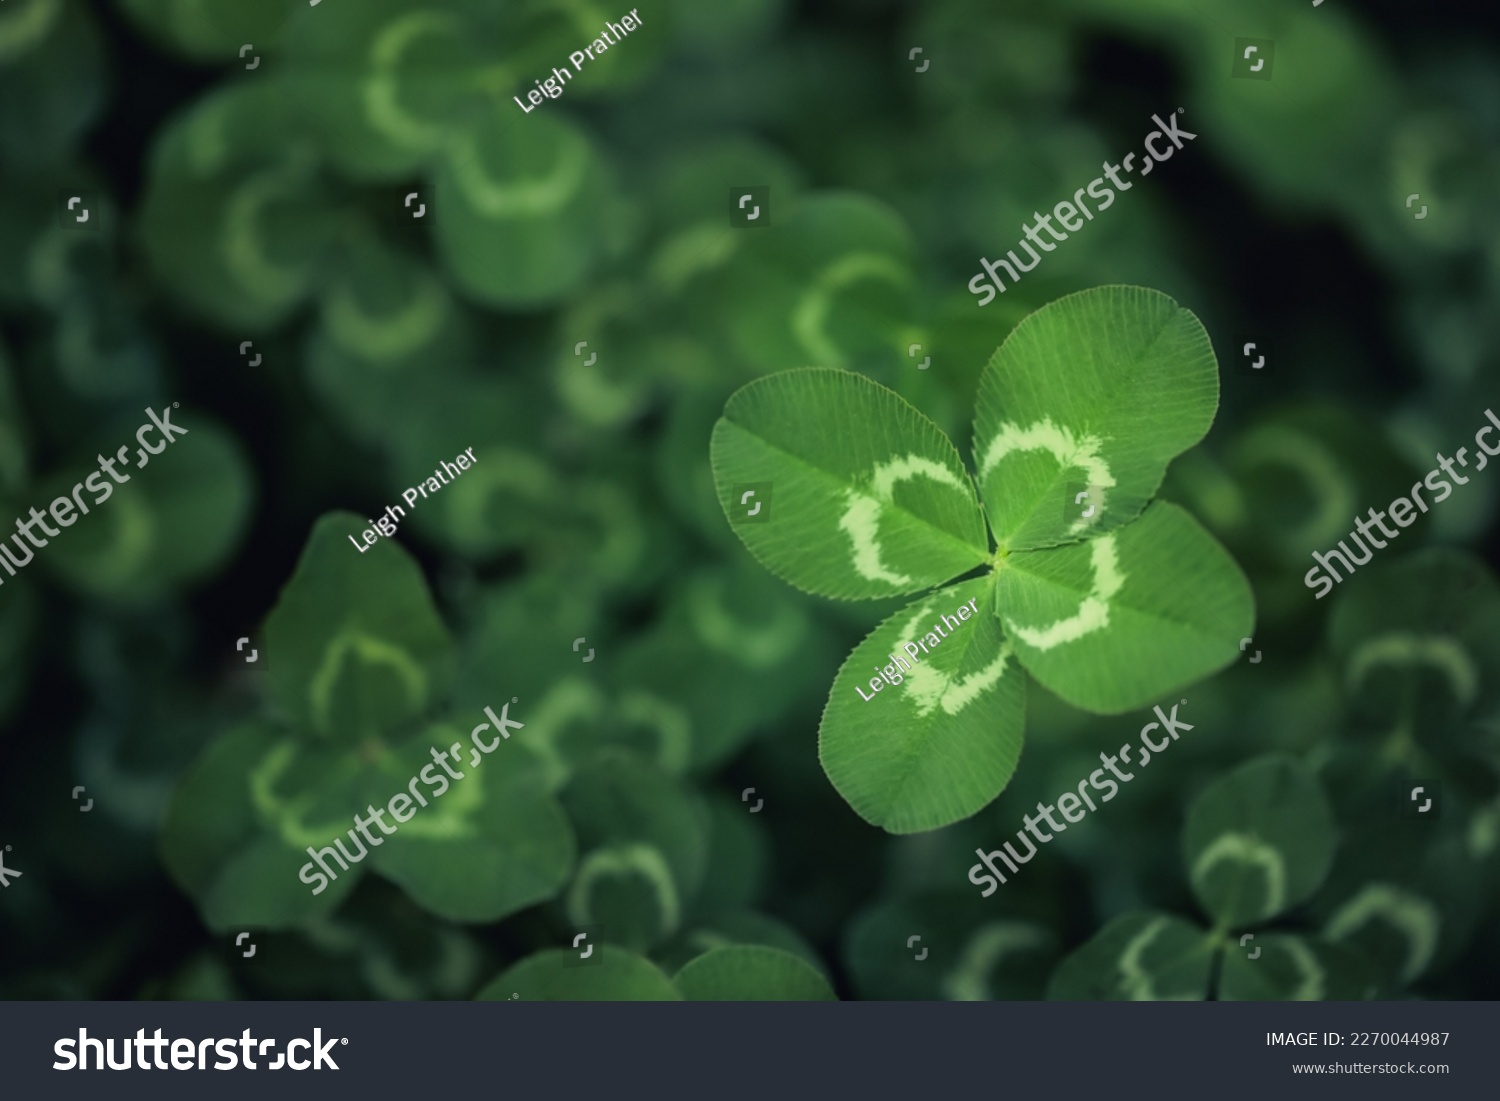 Unique find of a rare lucky four leaf clover in a field of clovers. For St Patrick's Day or symbolizing luck, fortune, and prosperity. #2270044987